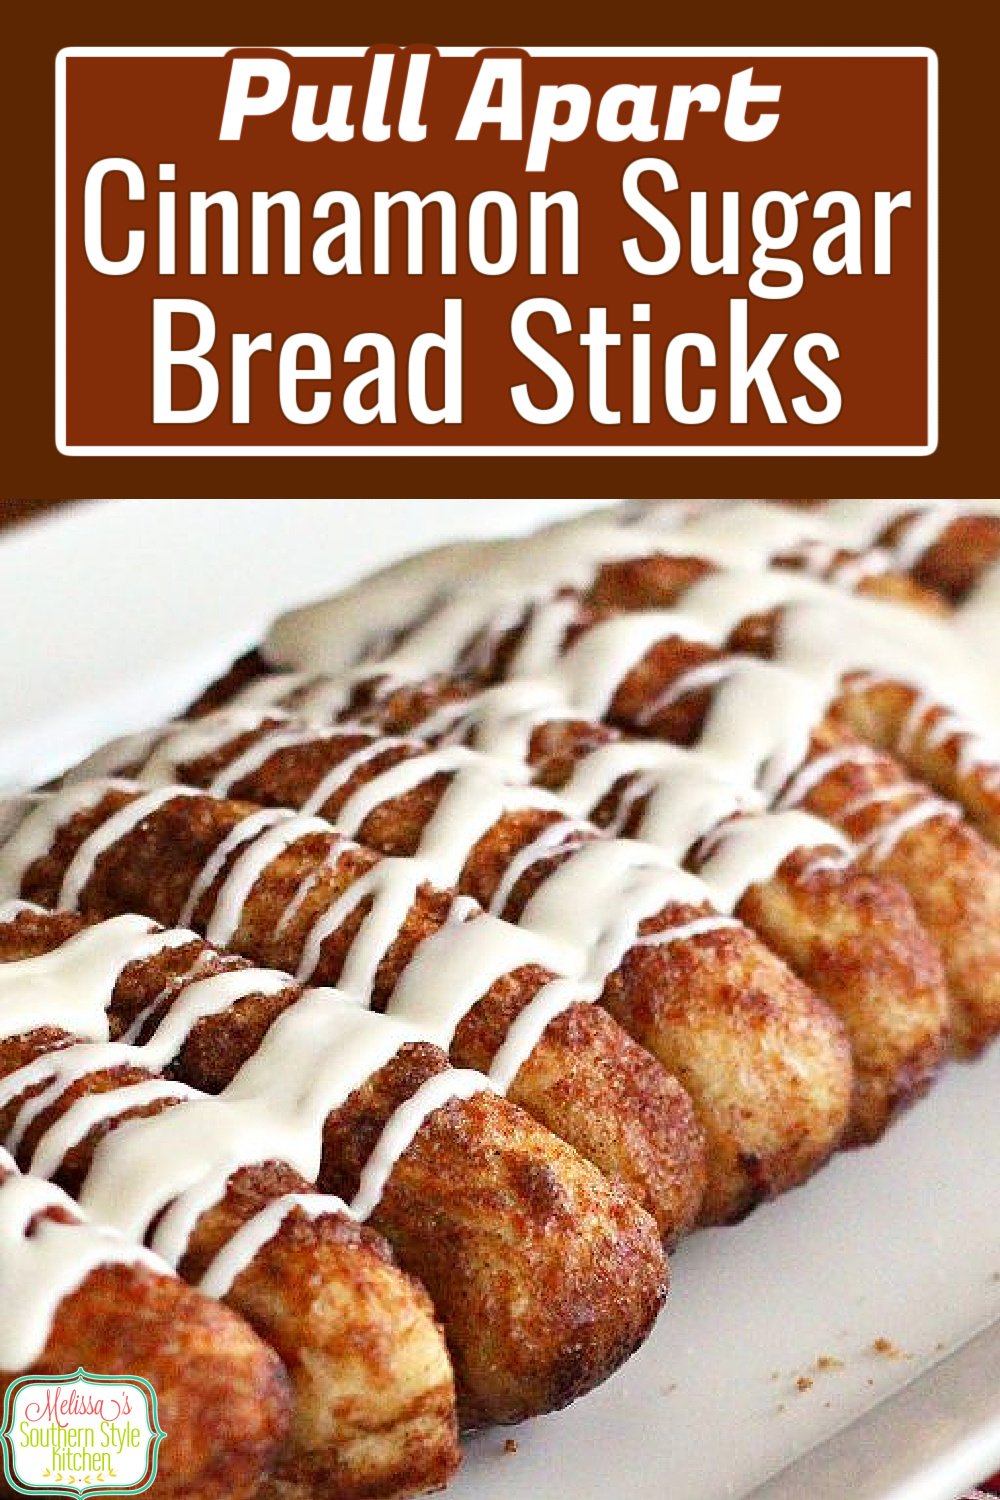 Serve these Pull Apart Cinnamon Sugar Bread Sticks with a homemade cream cheese dip for the ultimate snack #breadsticks #cinnamonbreadsticks #creamcheesedip #breadrecipes #bread #pullapartbreadsticks #brunch #appetizers #breakfast #southernfood #southernrecipes #holidaybrunch via @melissasssk